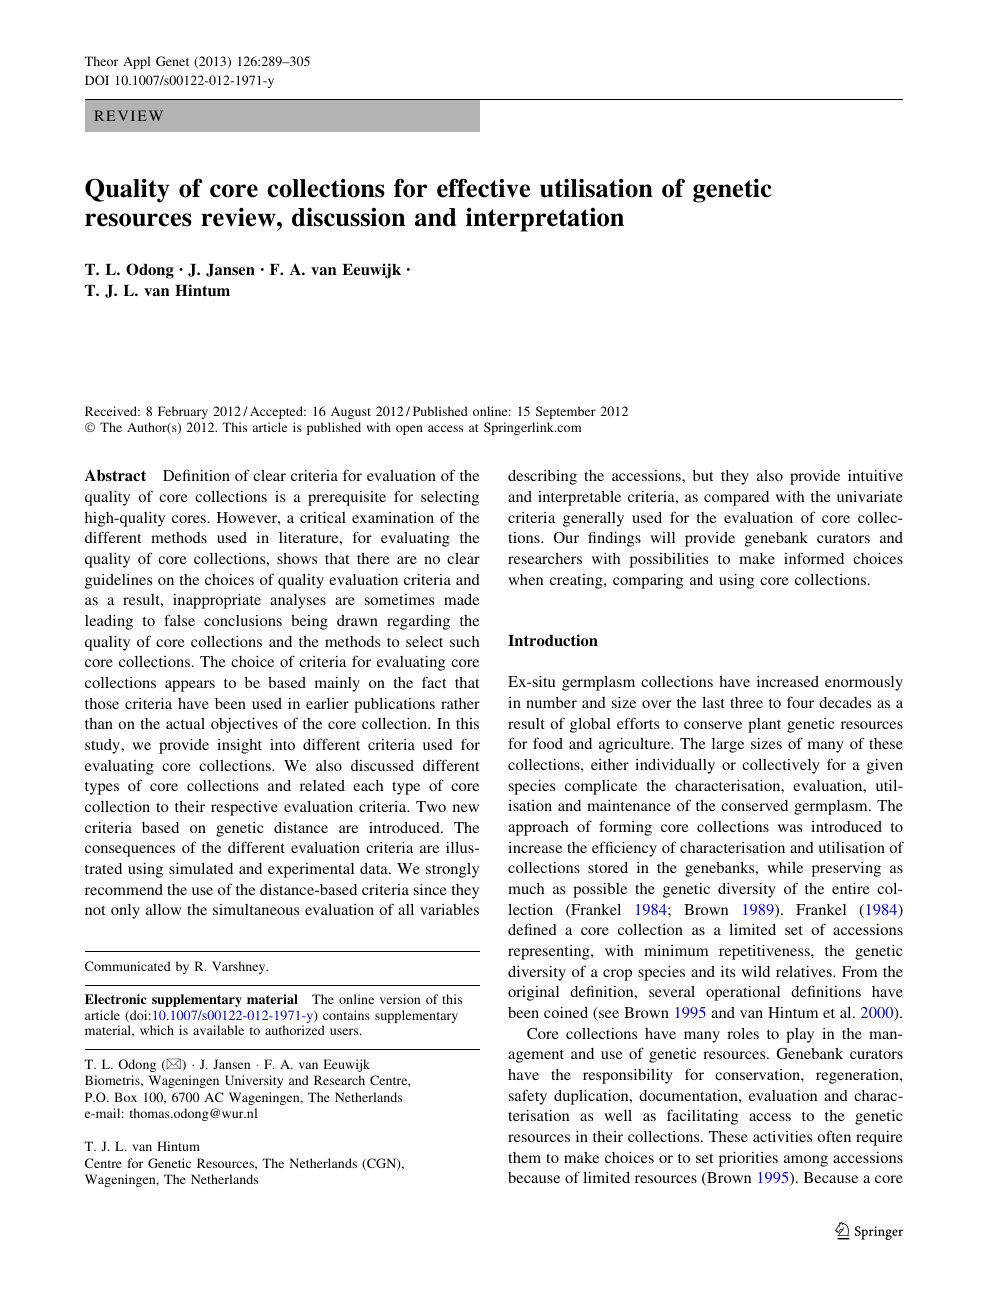 Quality Of Core Collections For Effective Utilisation Of Genetic Resources Review Discussion And Interpretation Topic Of Research Paper In Biological Sciences Download Scholarly Article Pdf And Read For Free On Cyberleninka